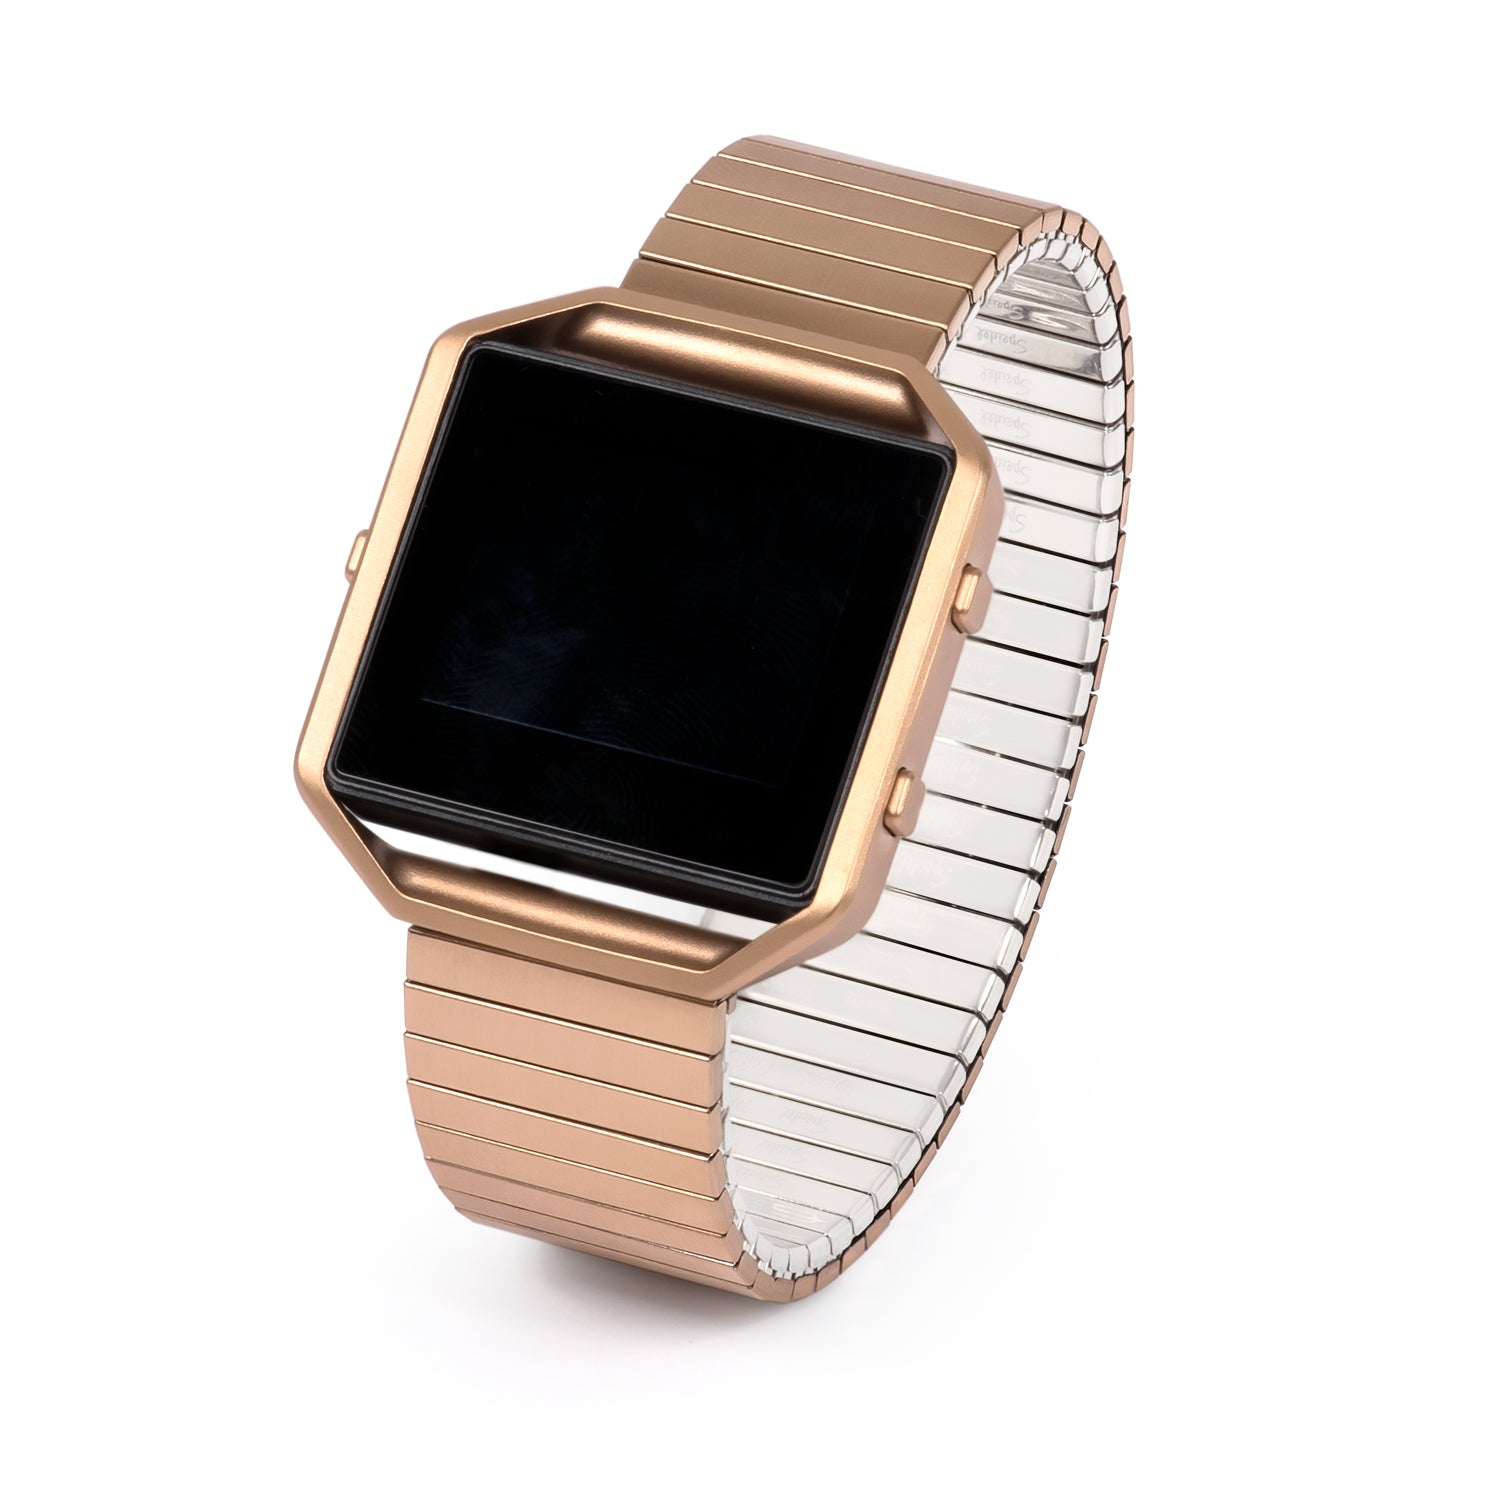 fitbit blaze leather band